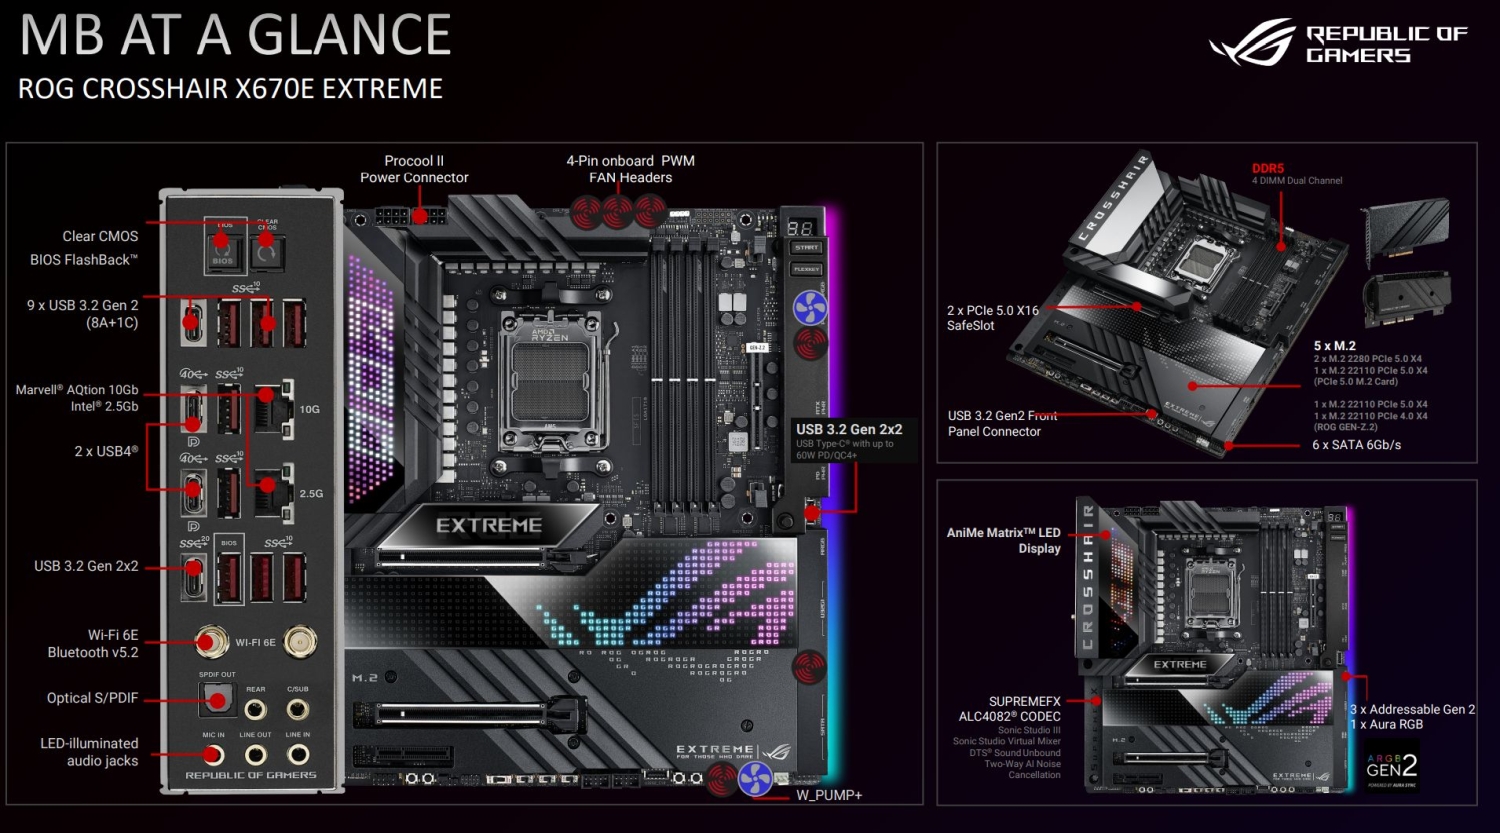 ASUS details flagship ROG Crosshair X670E Extreme + HERO motherboards